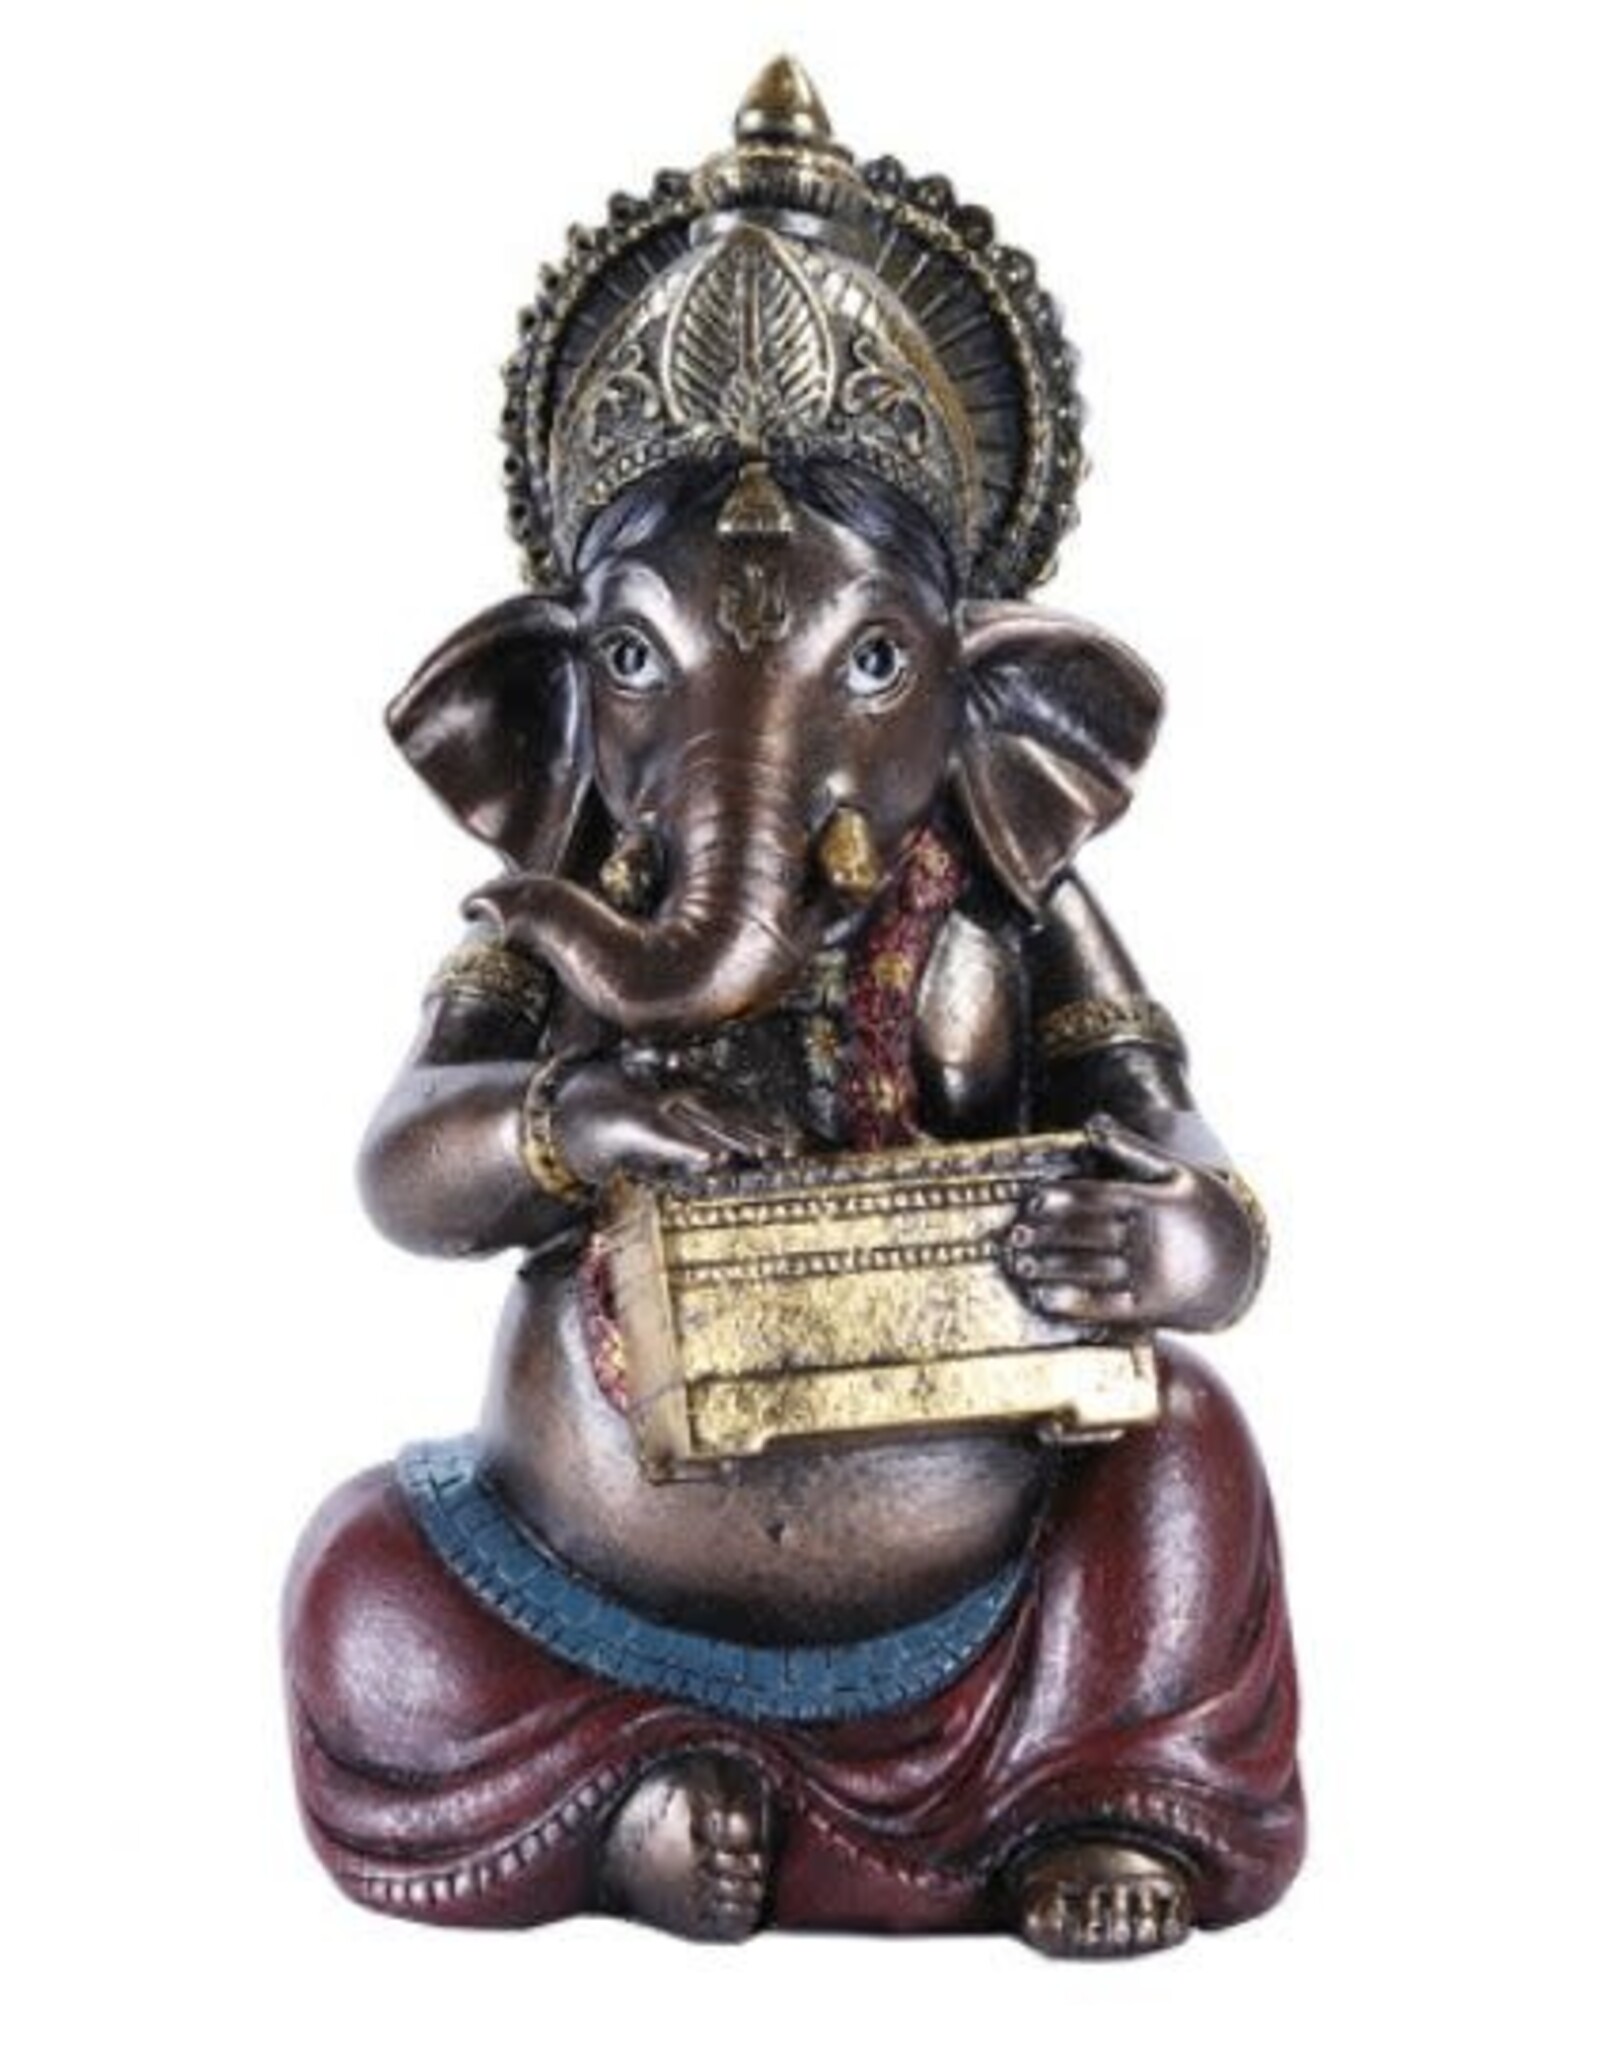 Pacific Trading Ganesha Statue with instrument - 4" x 4" x 6 3/4